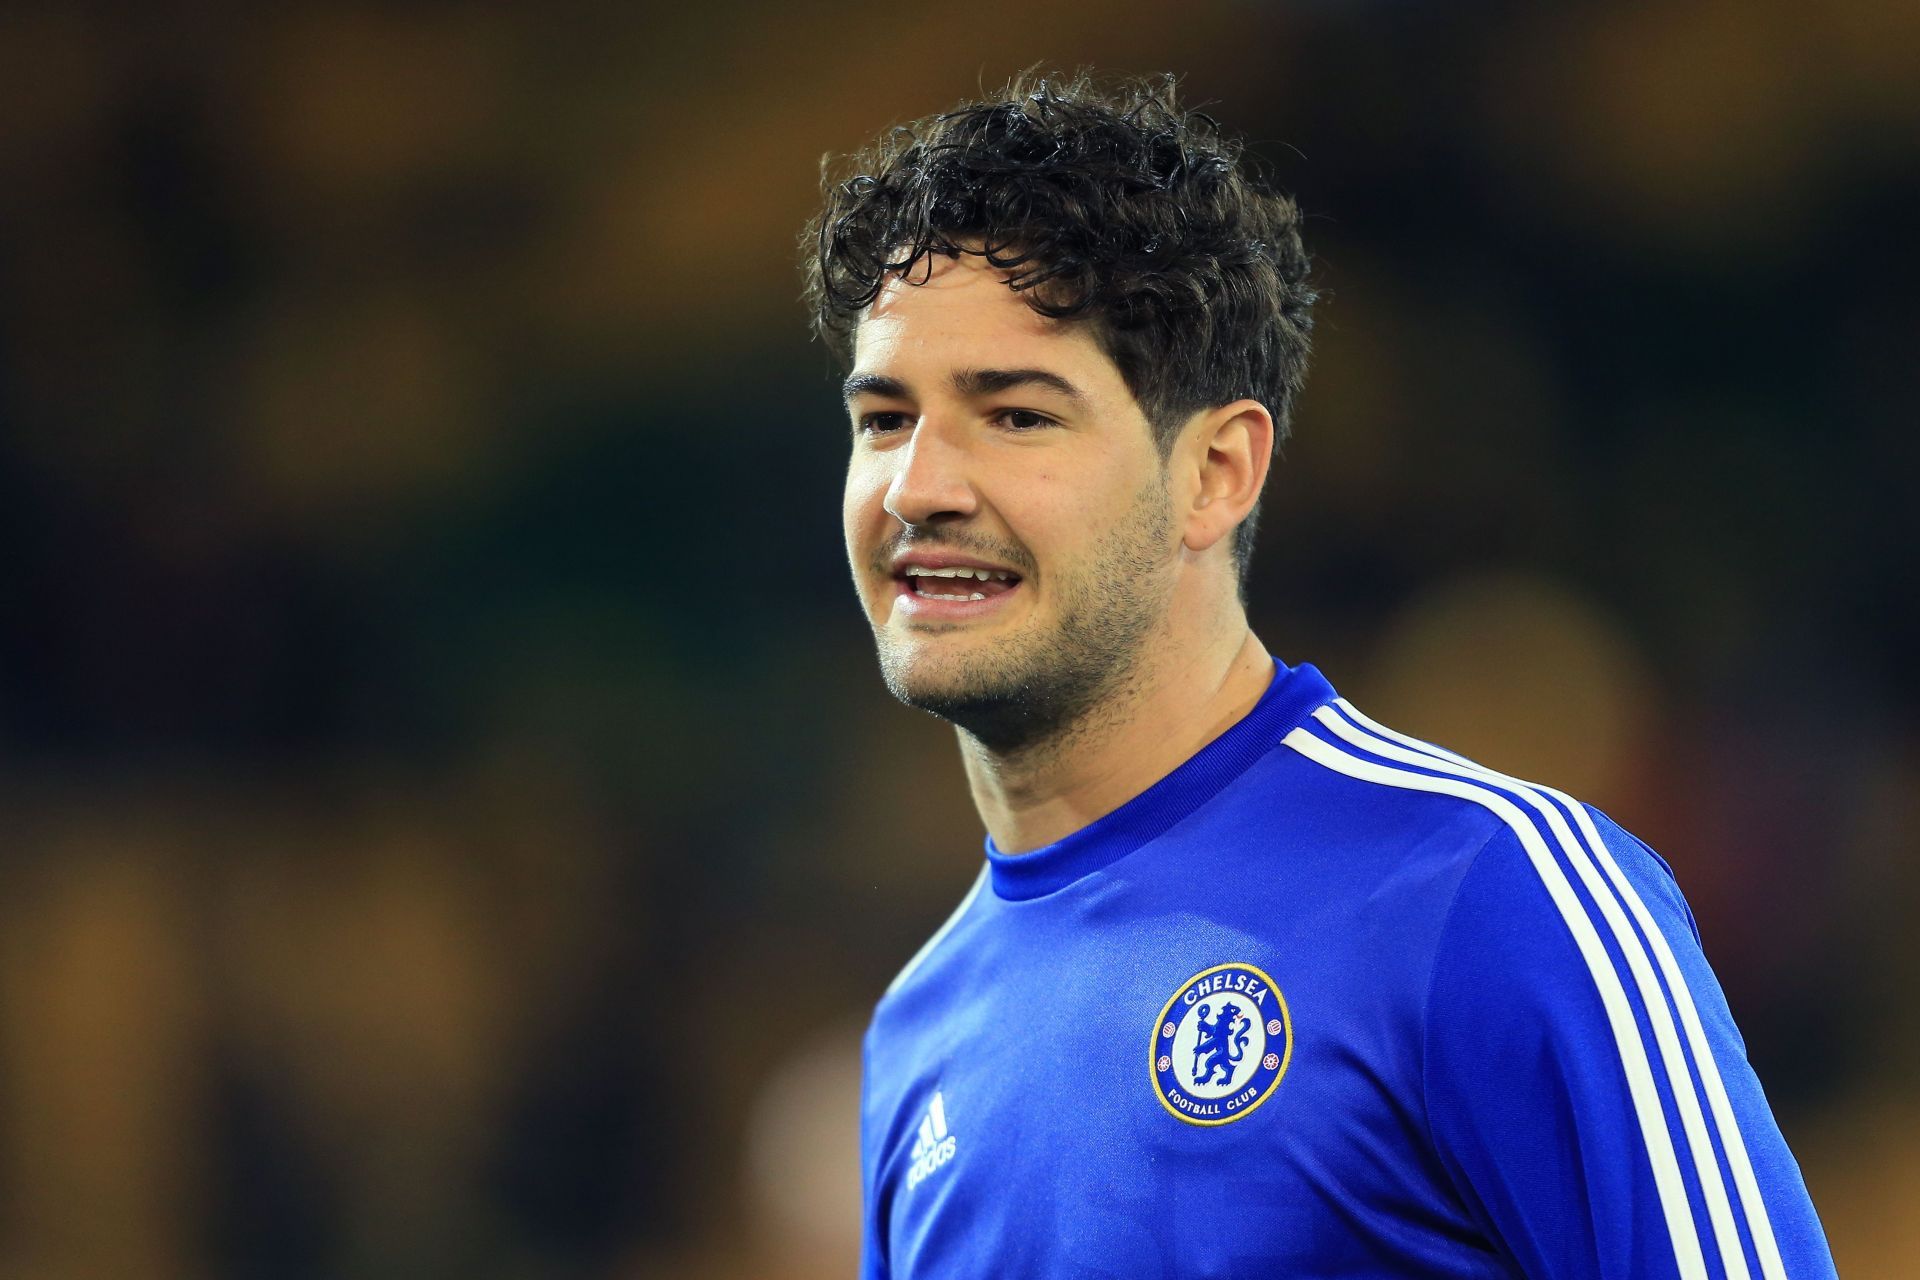 Pato has regrets over moving to the Blues